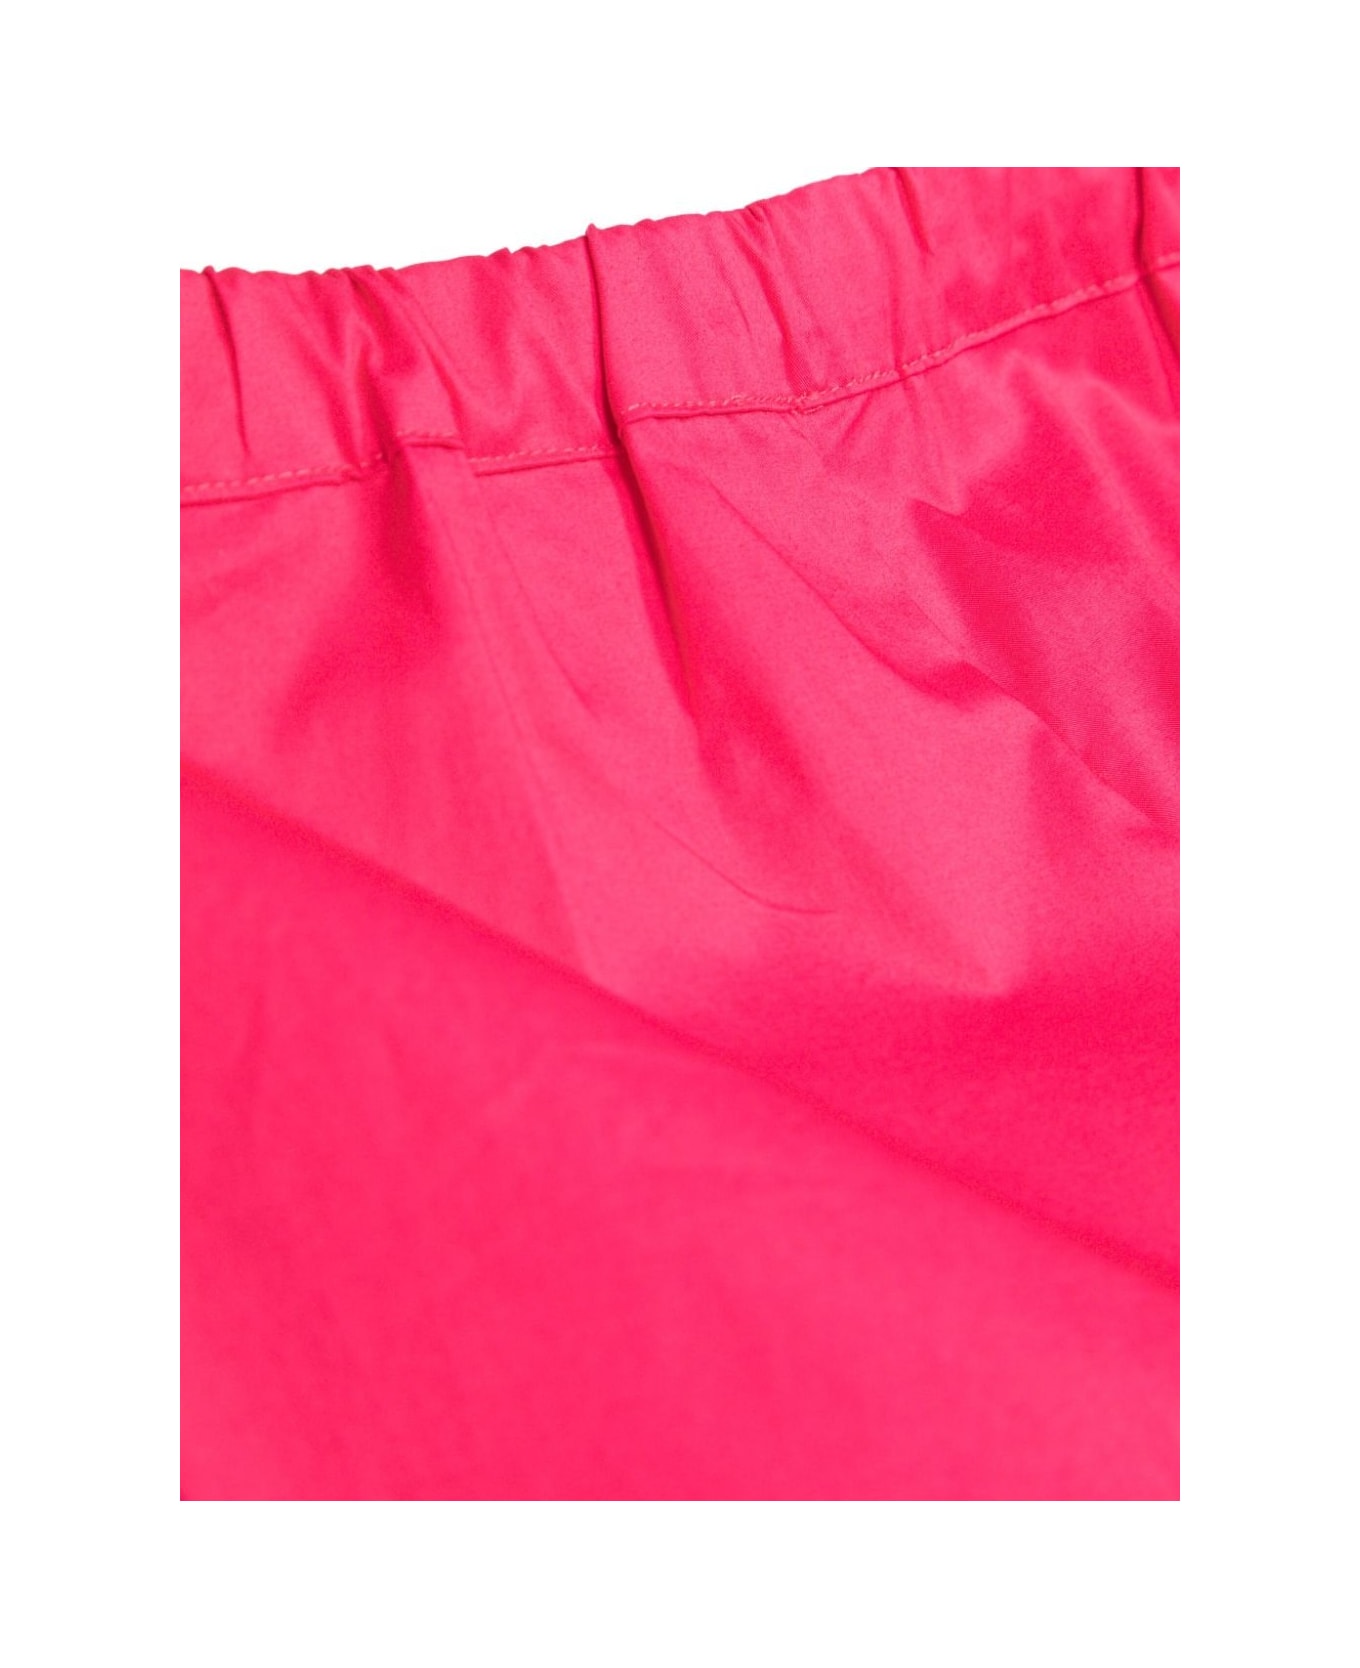 Il Gufo Stretch Cotton Poplin Set In Pink And Carmine Red - Red